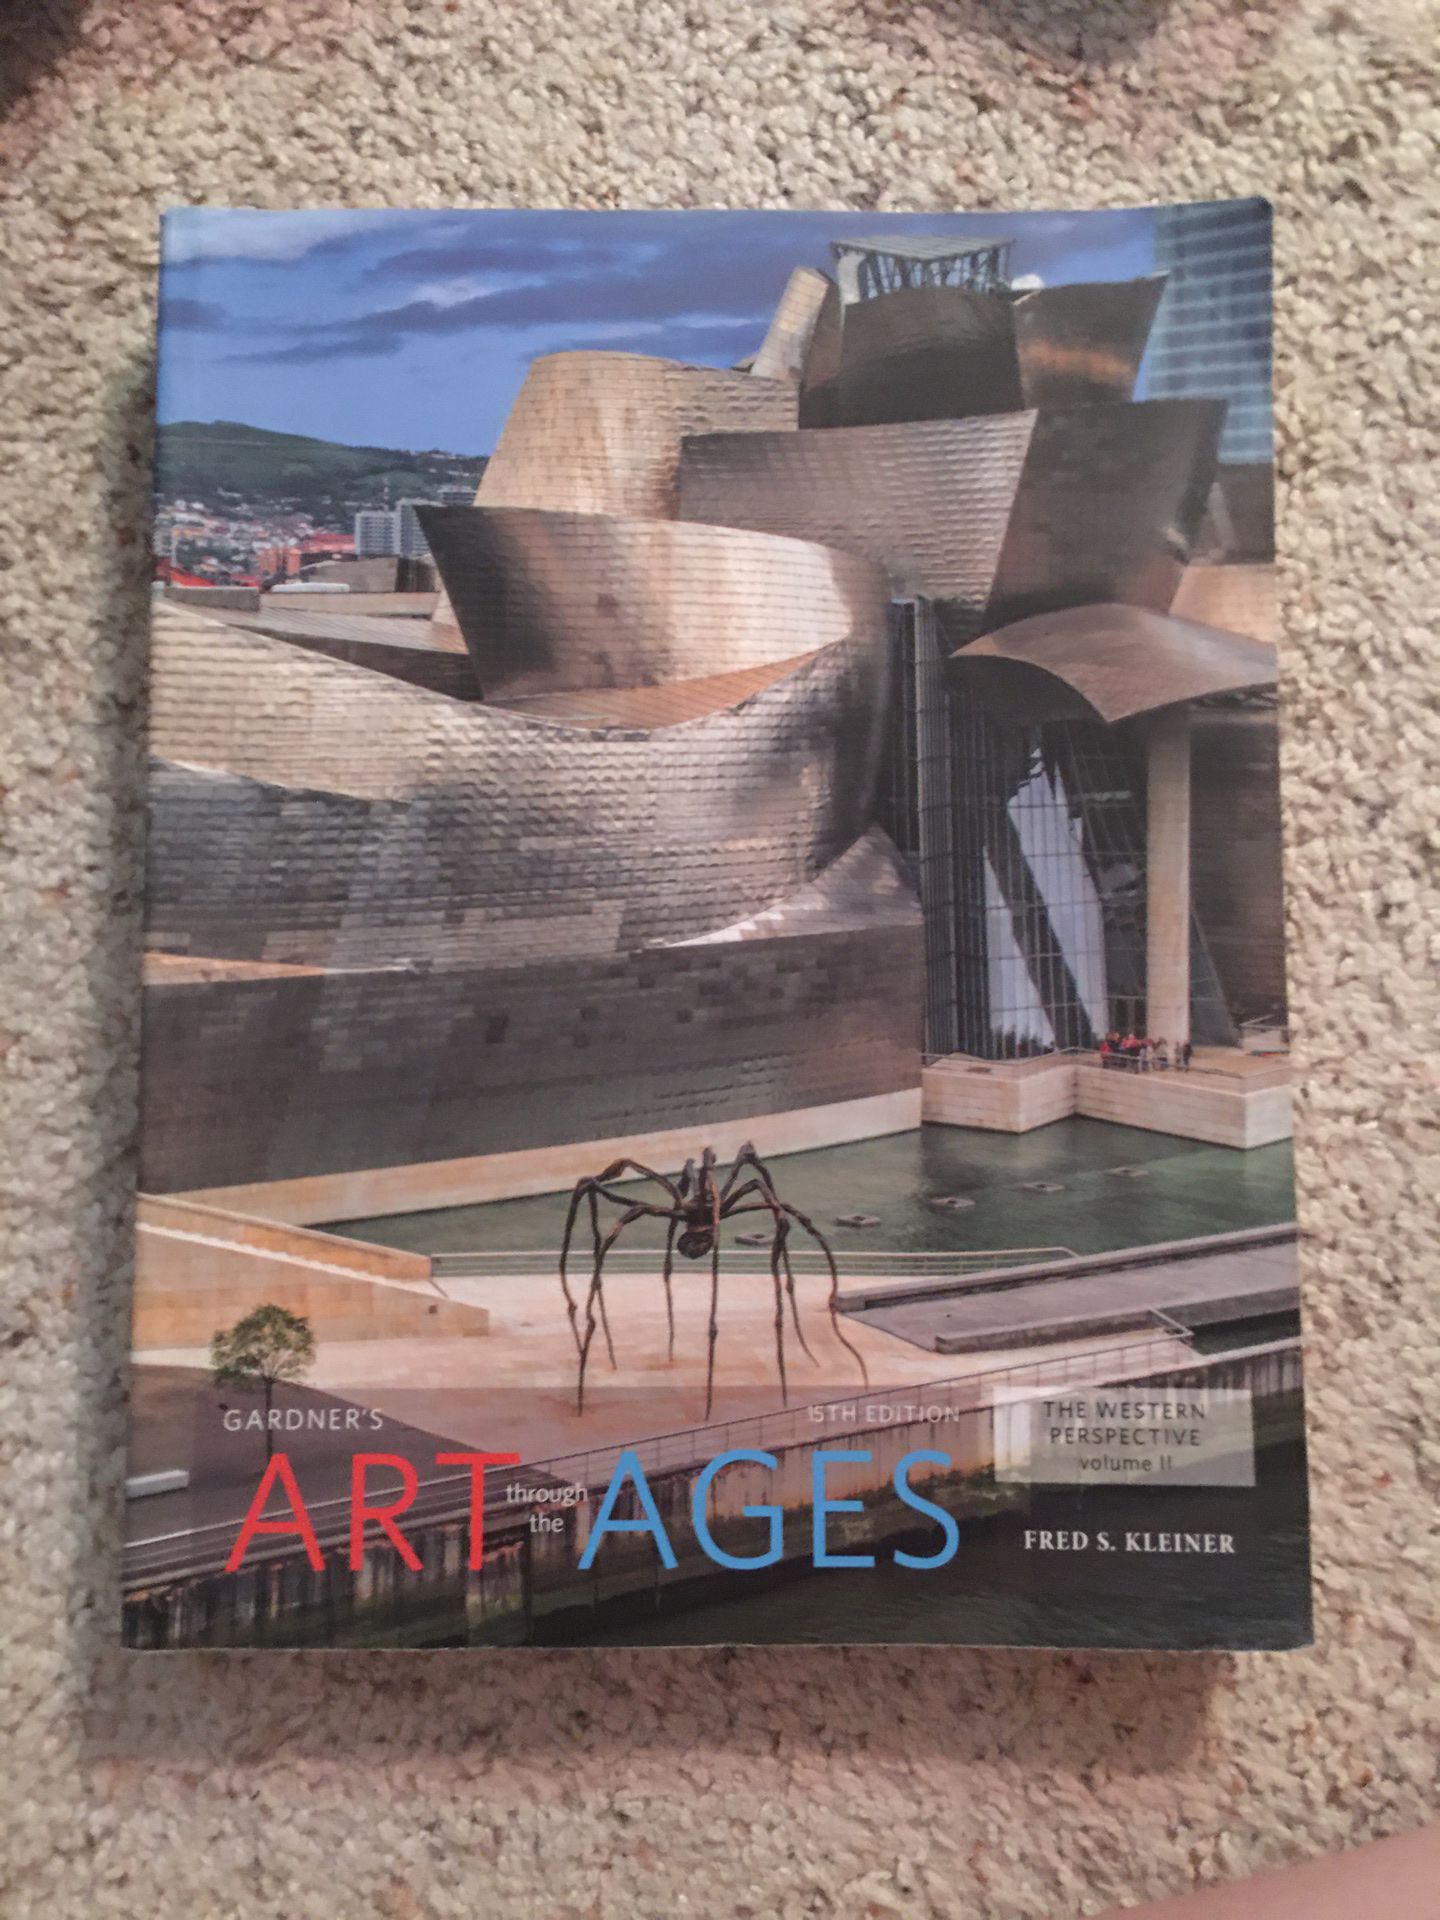 Gardners art through the ages 15th édition